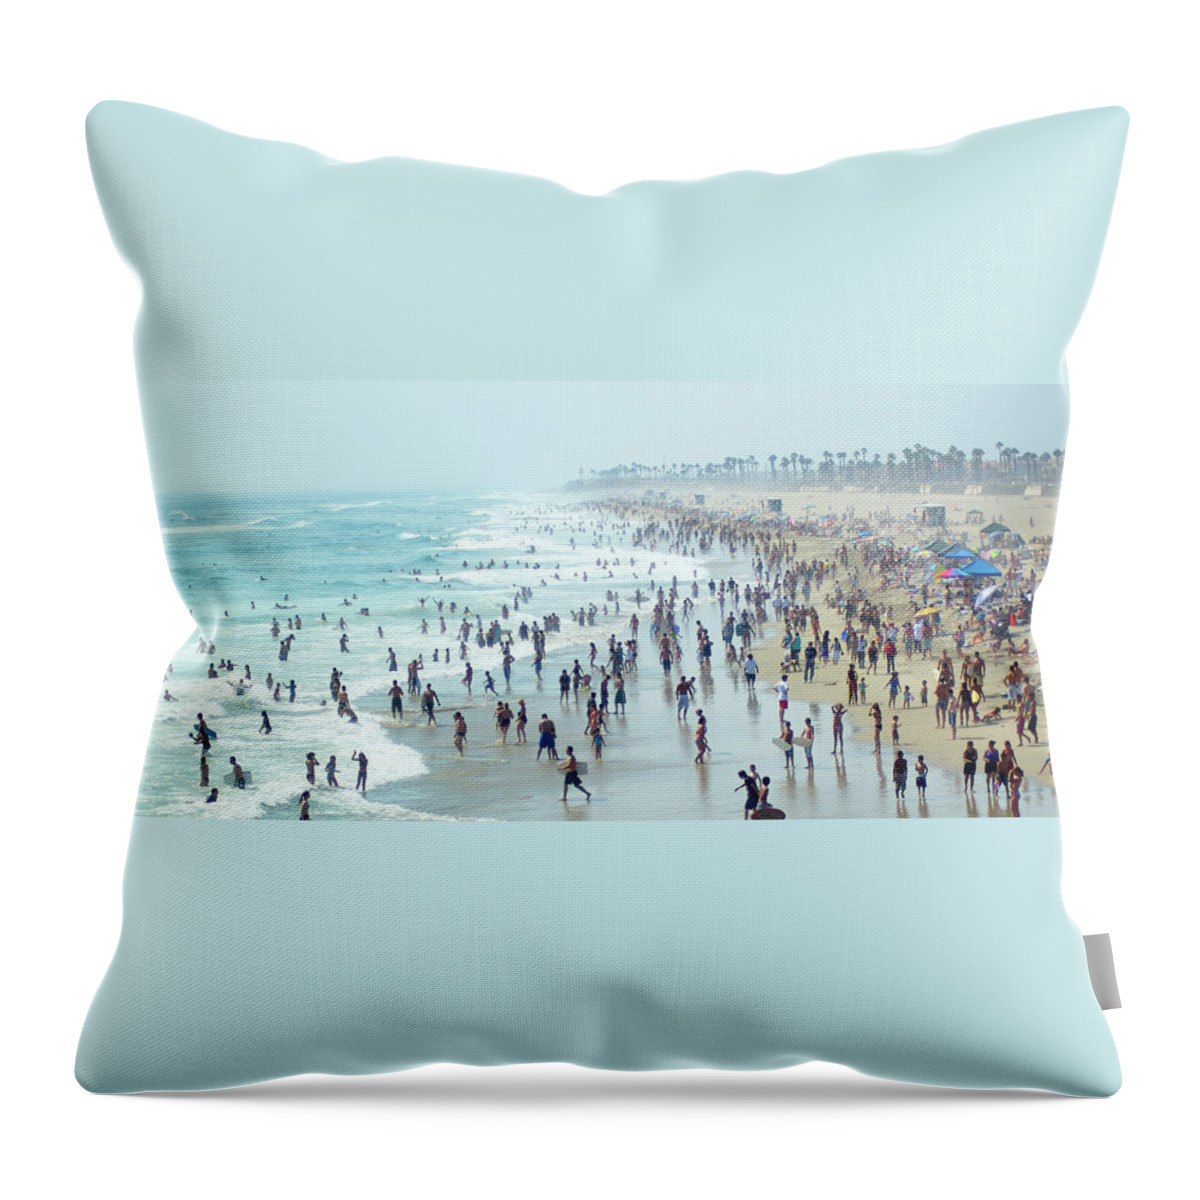 Crowd Throw Pillow featuring the photograph Crowded Beach by Motorider